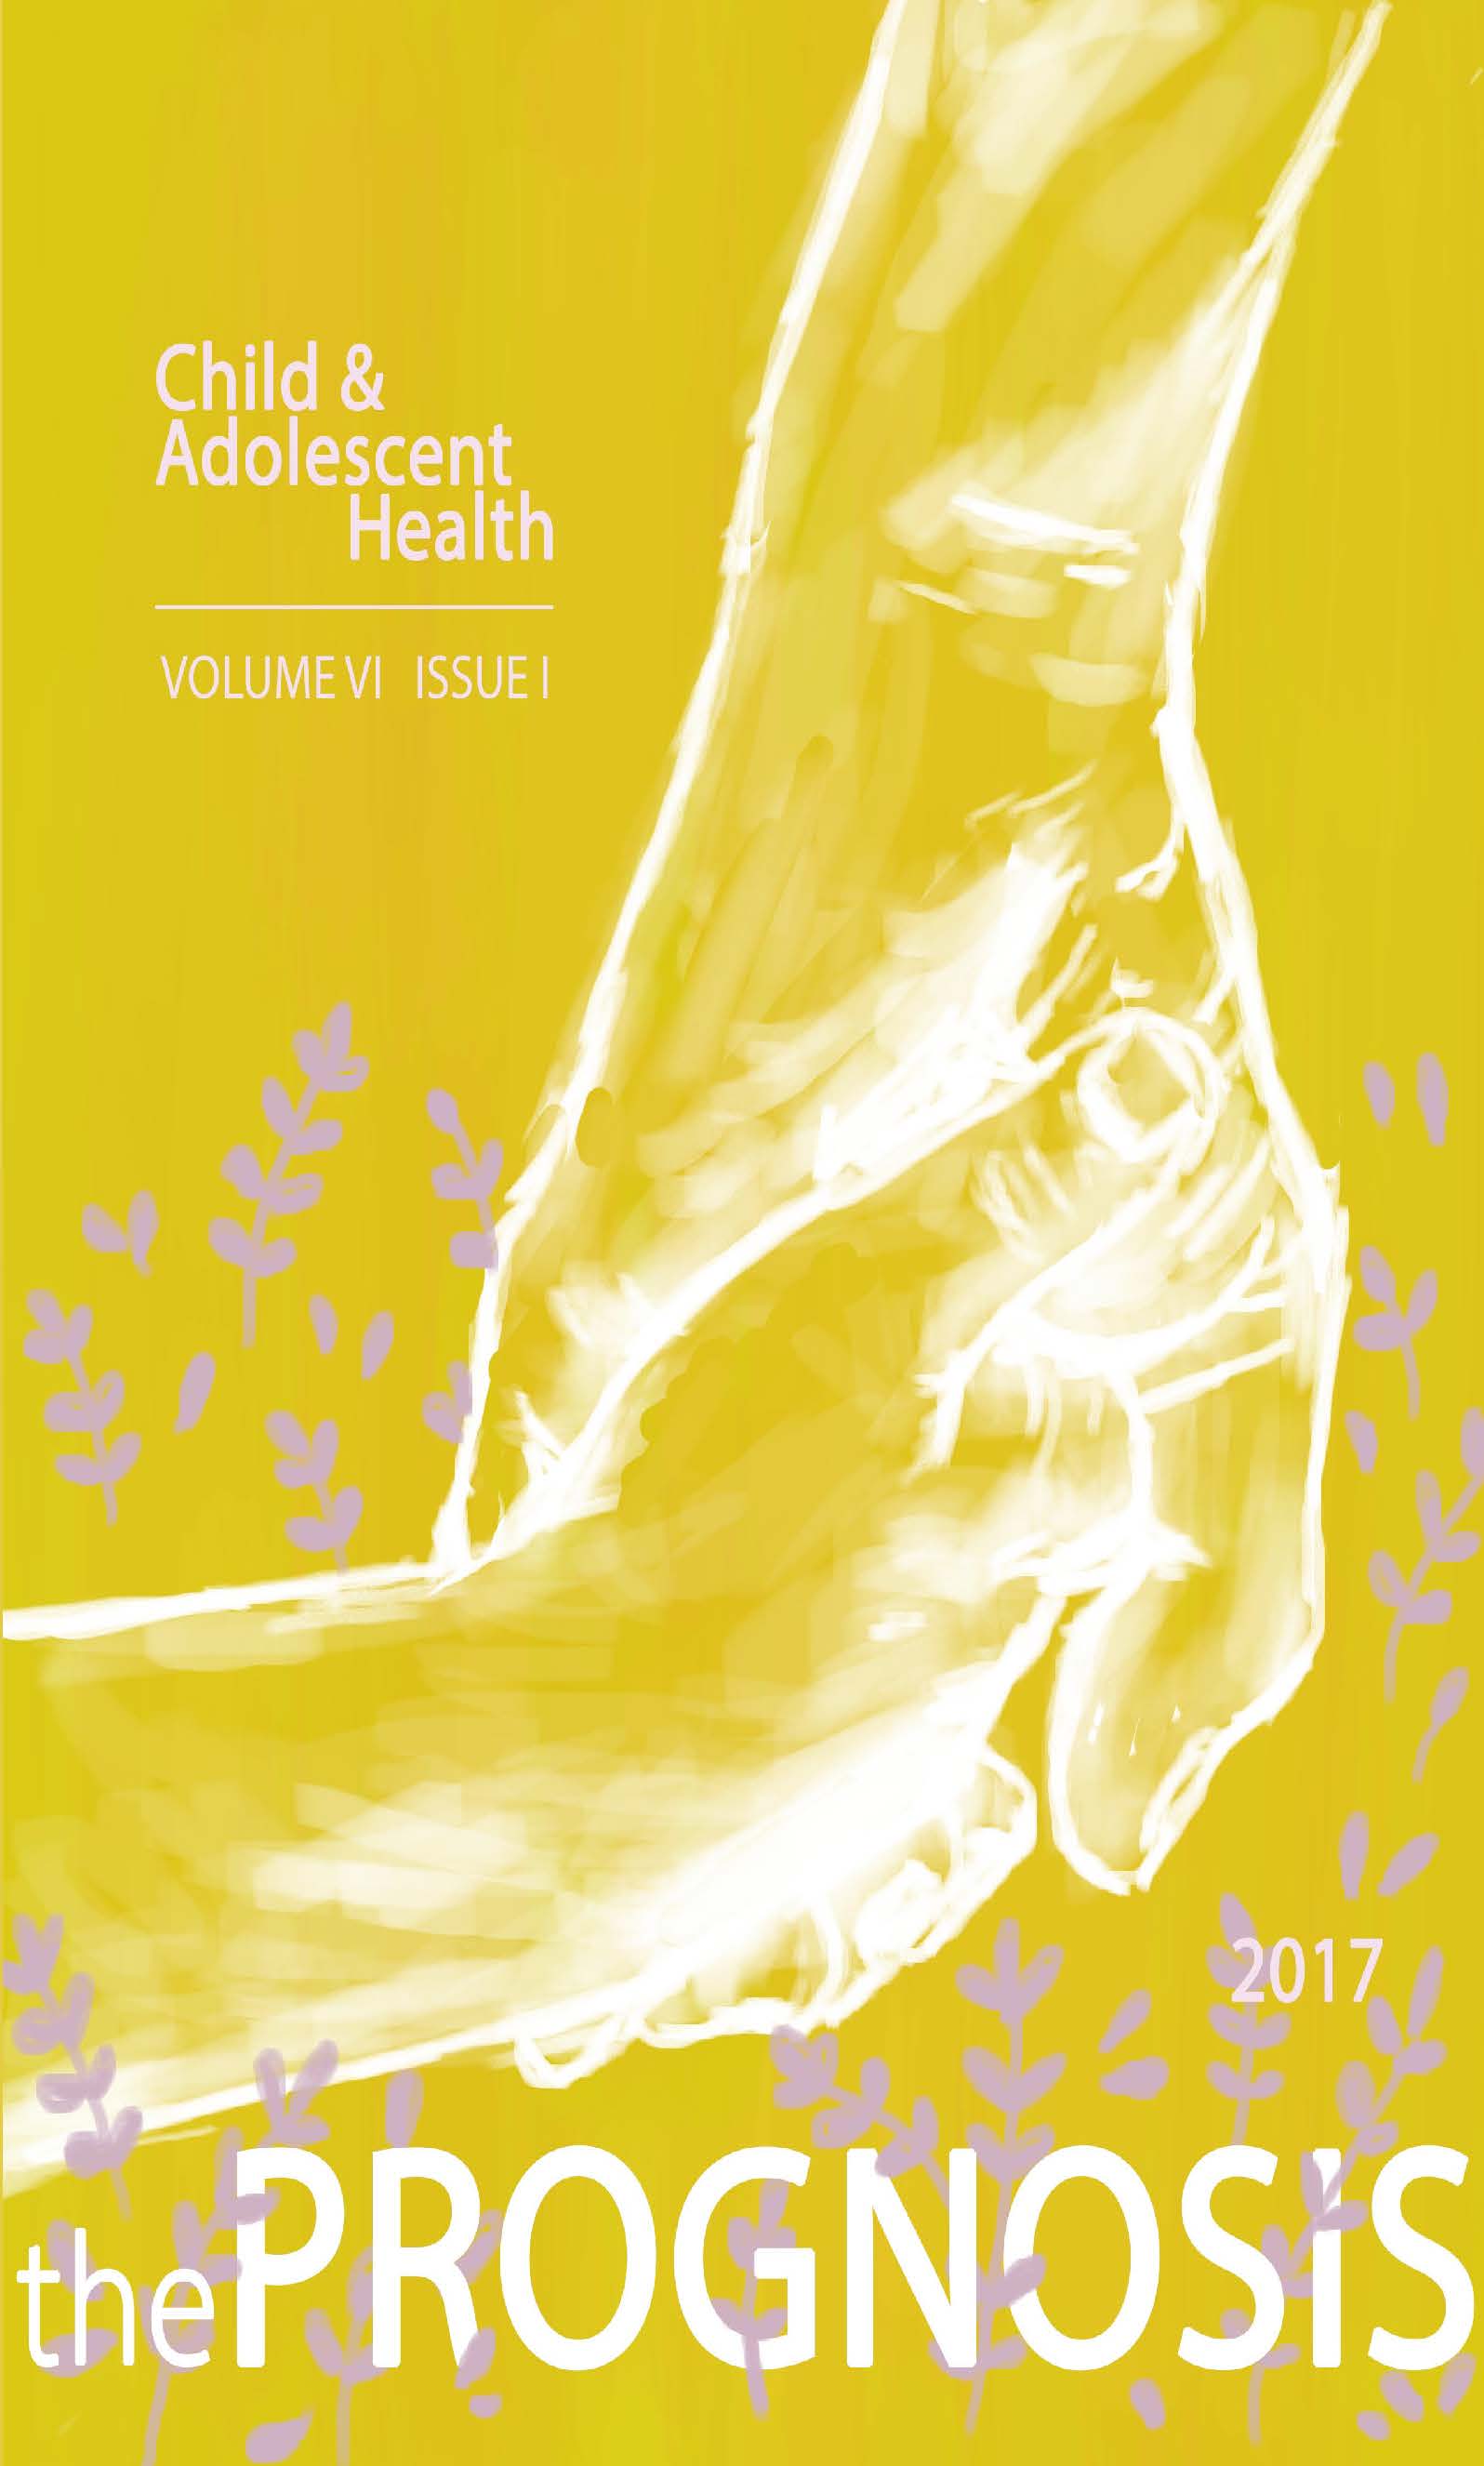 Prognosis volume 6 cover image - drawing of two hands holding on a yellow background